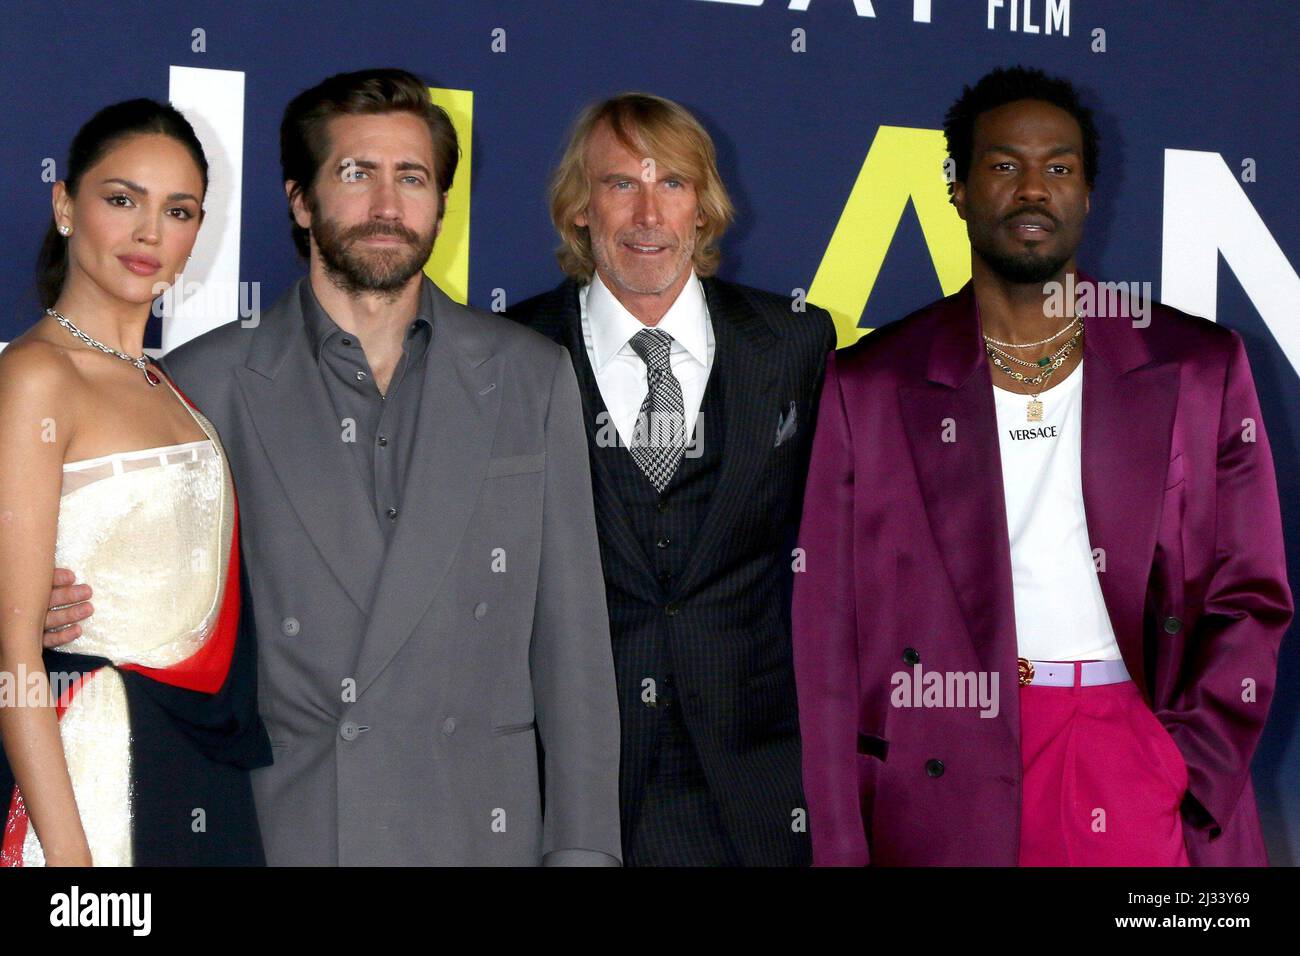 Los Angeles, CA. 4th Apr, 2022. Eiza Gonzalez, Jake Gyllenhaal, Michael Bay, Yahya Abdul-Mateen II at arrivals for AMBULANCE Premiere, The Academy Museum of Motion Pictures, Los Angeles, CA April 4, 2022. Credit: Priscilla Grant/Everett Collection/Alamy Live News Stock Photo